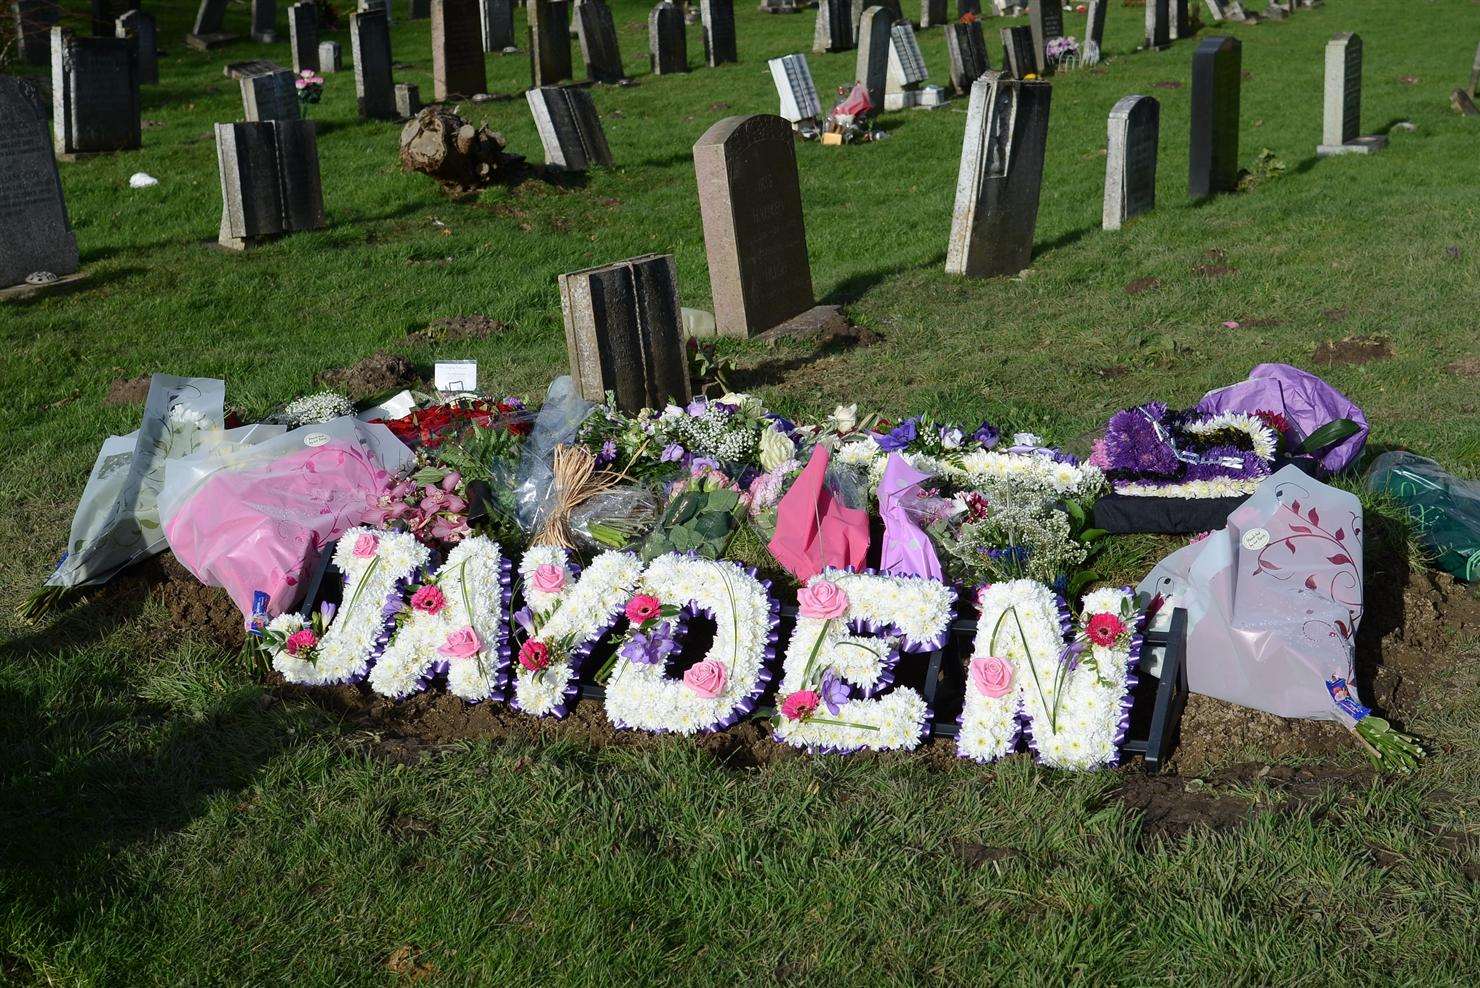 Flowers at the grave of Jayden Parkinson at St Martin's Church in Cheriton